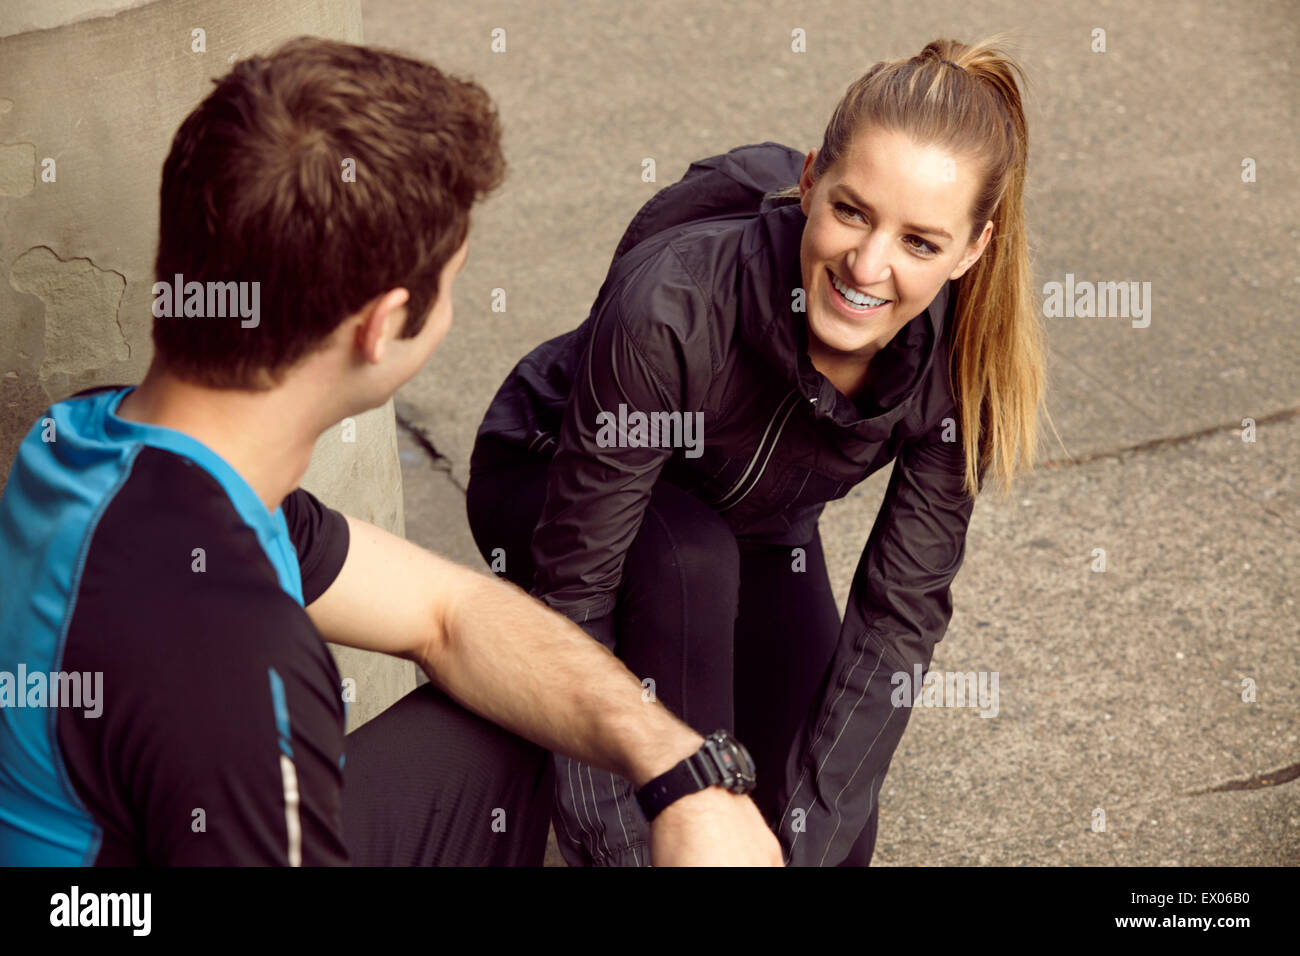 Young male and female runners tying shoelace on sidewalk Stock Photo